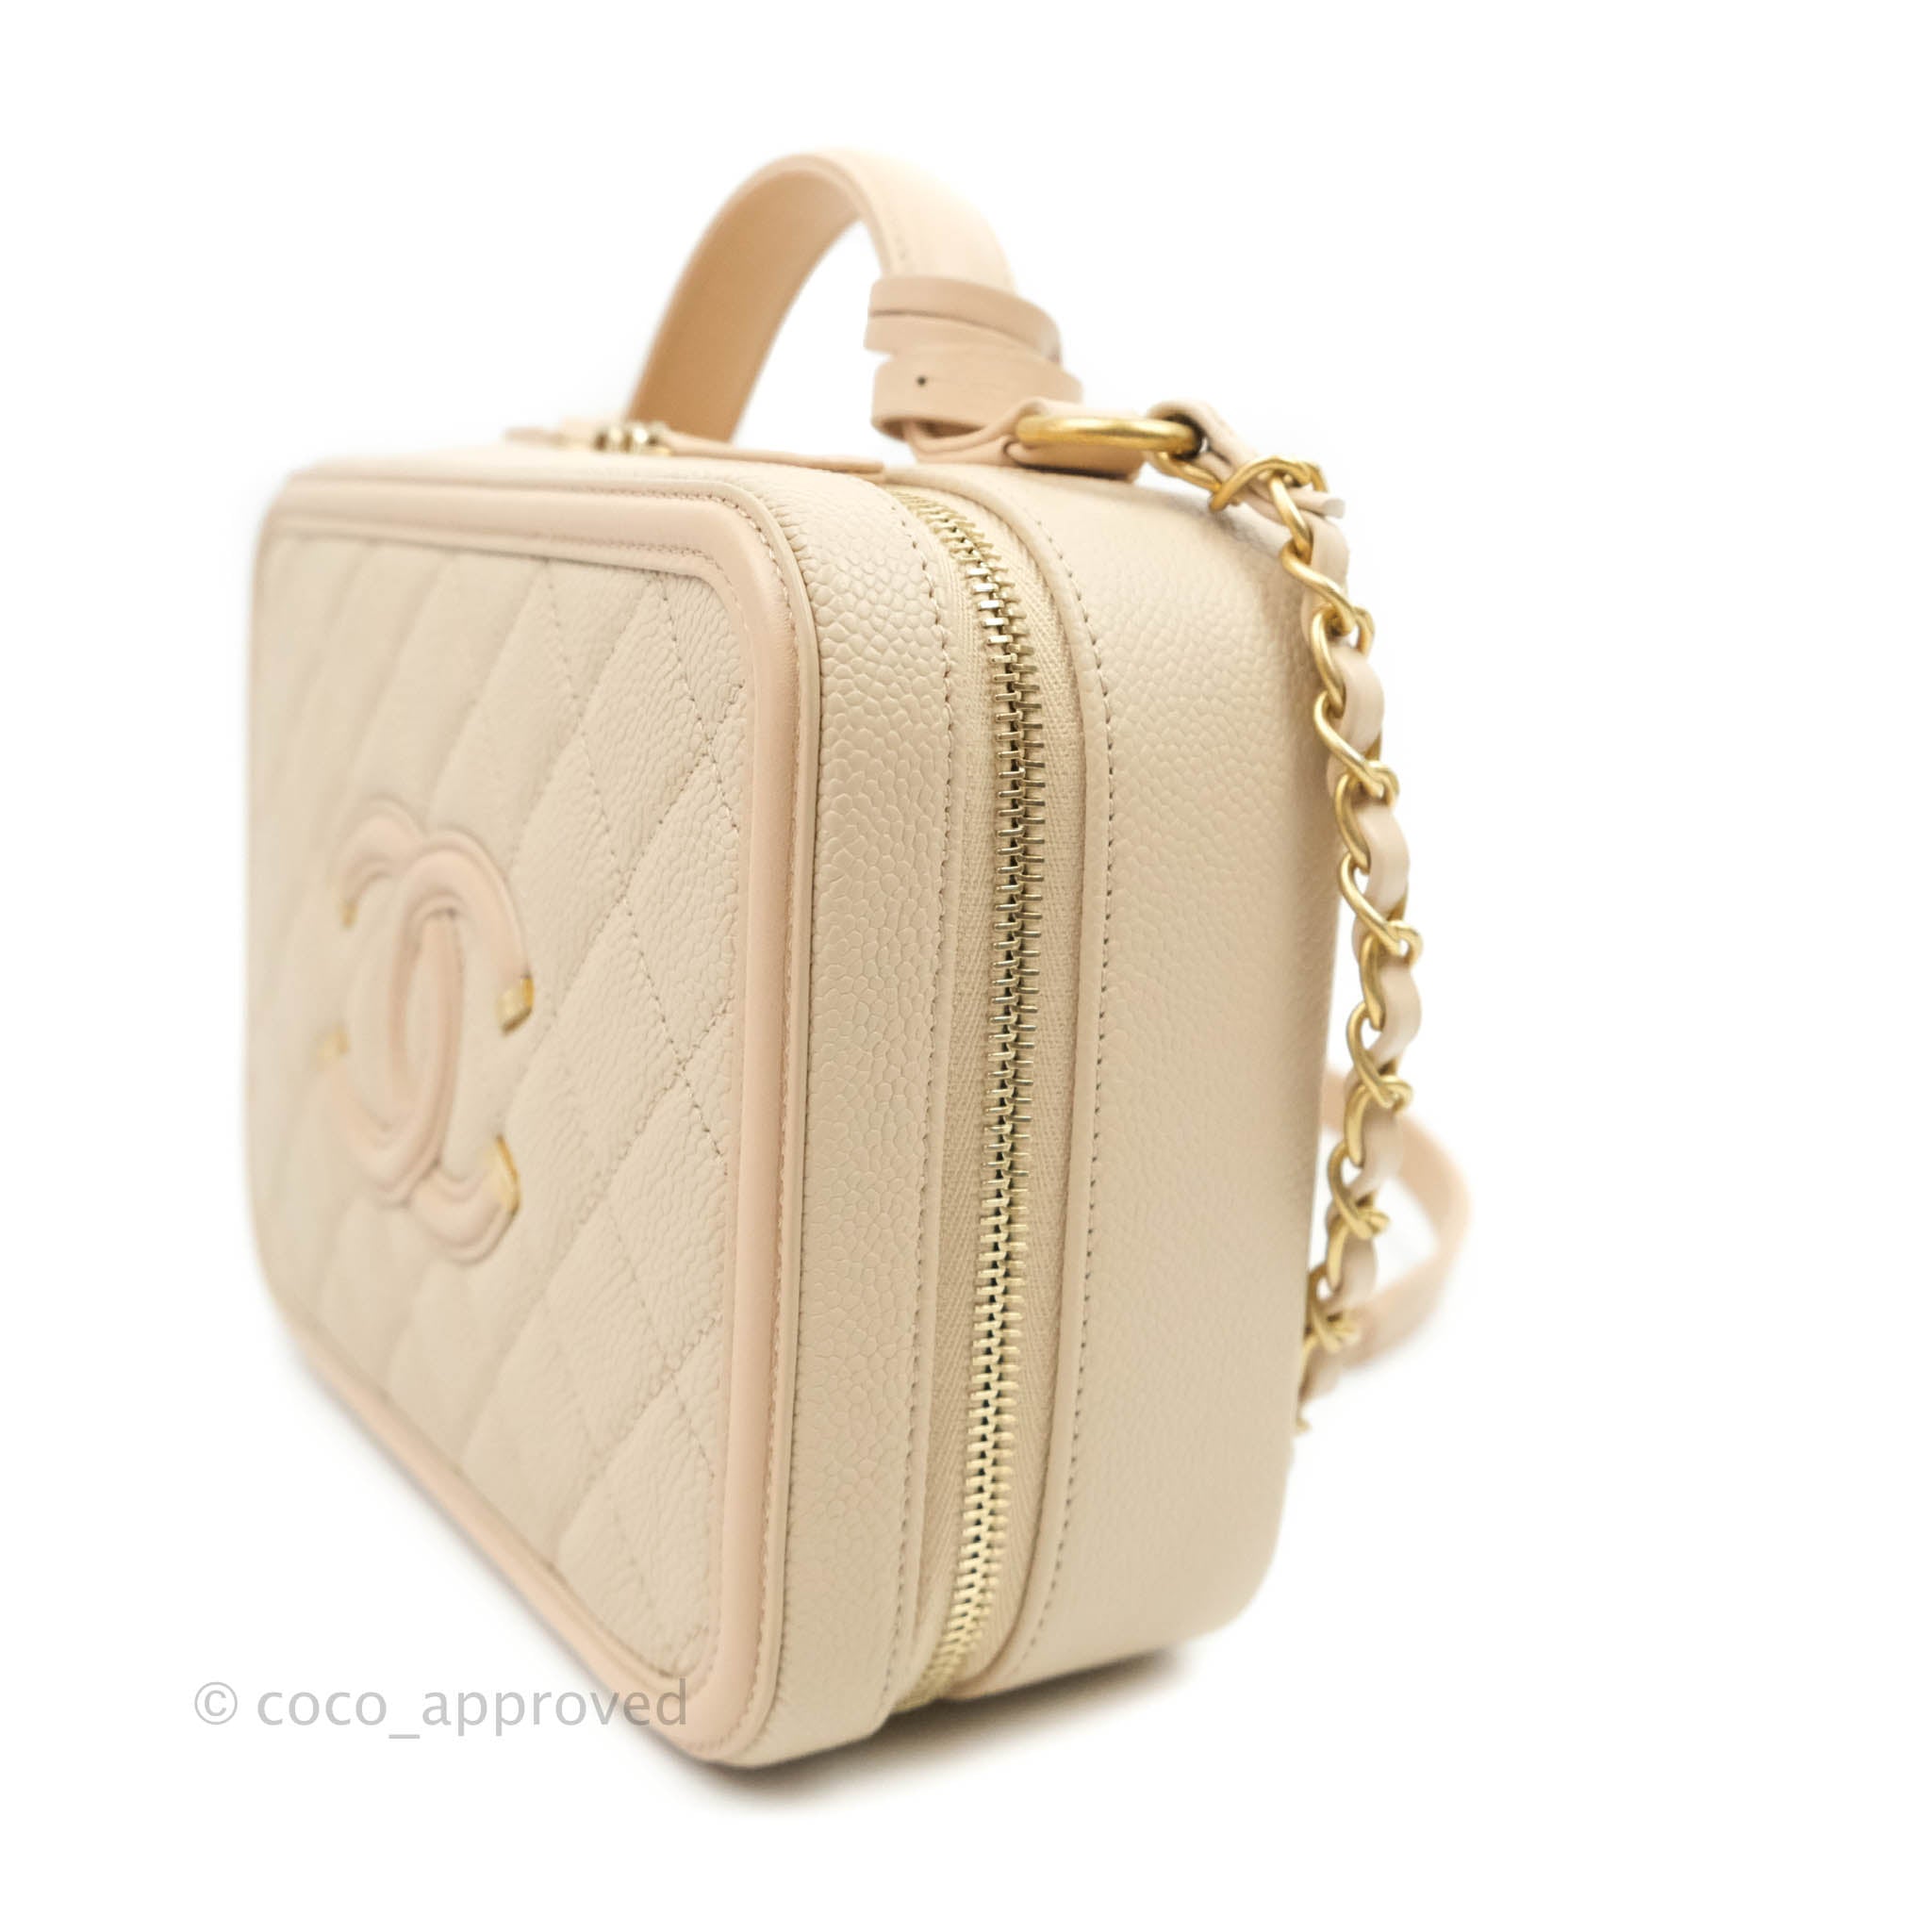 2018 Chanel Light Beige Quilted Caviar Leather Small Filigree Vanity Case